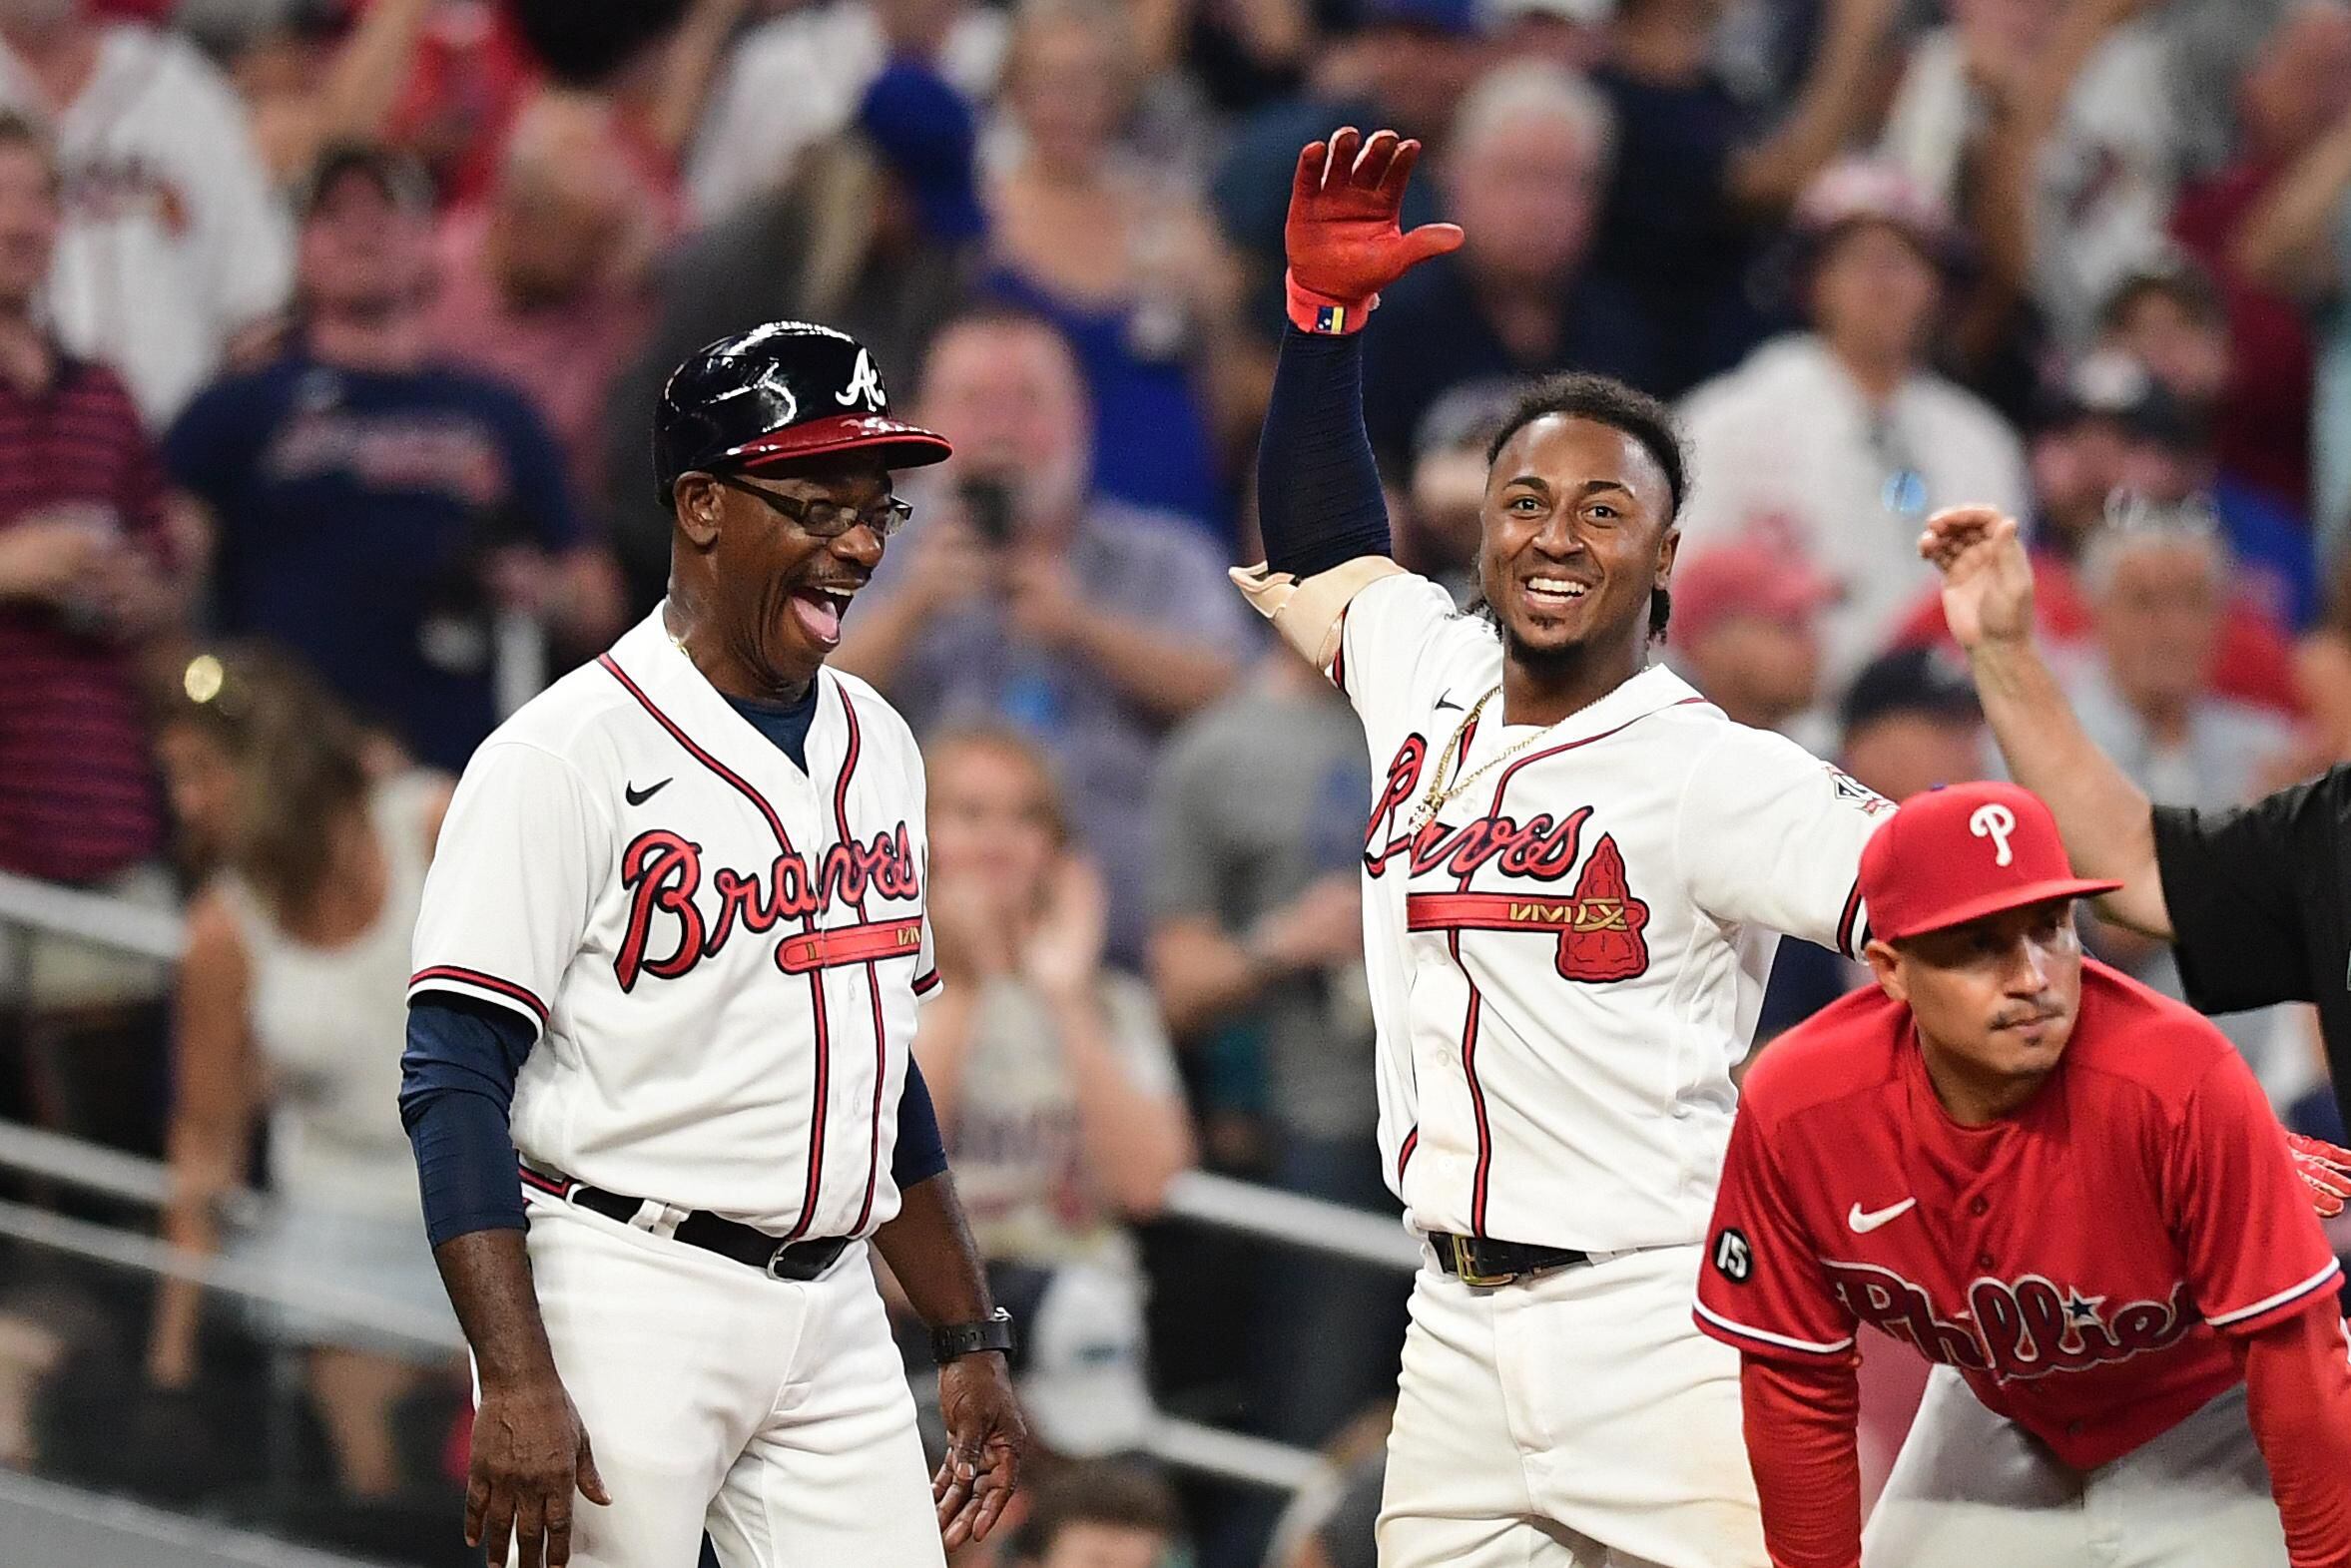 Atlanta Braves claim sixth straight NL East title with win over